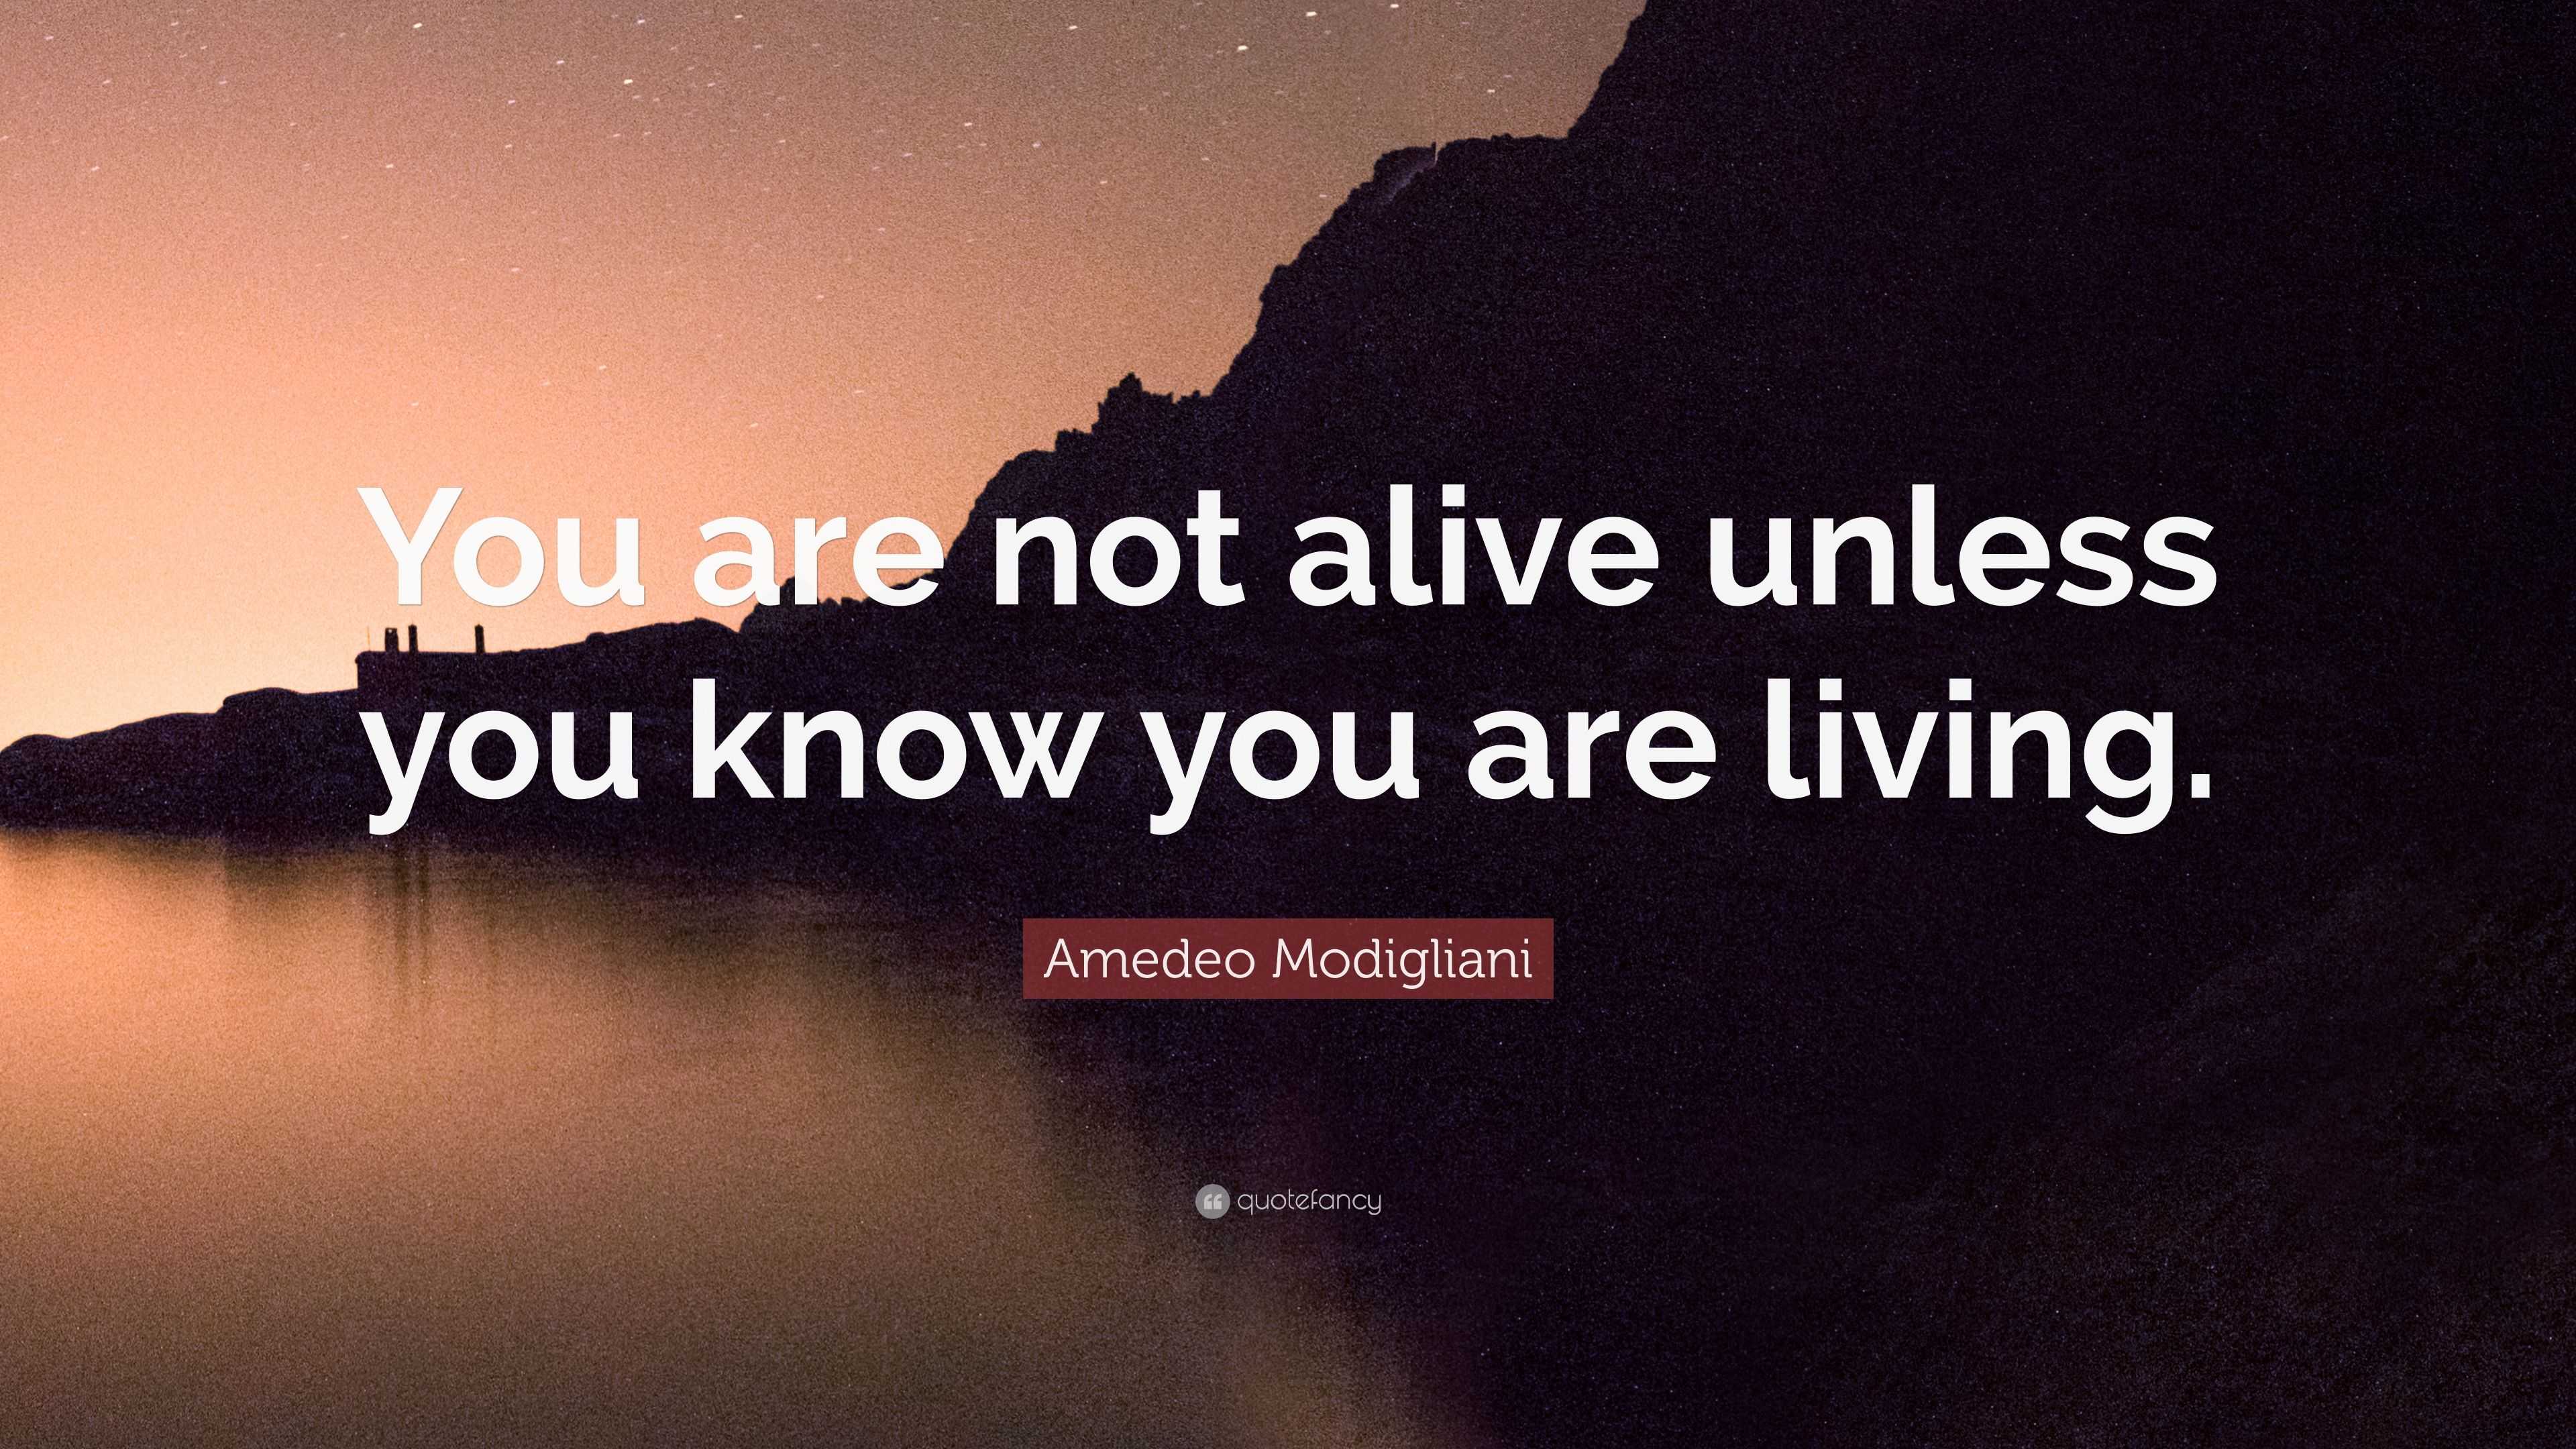 Amedeo Modigliani Quote You Are Not Alive Unless You Know You Are Living